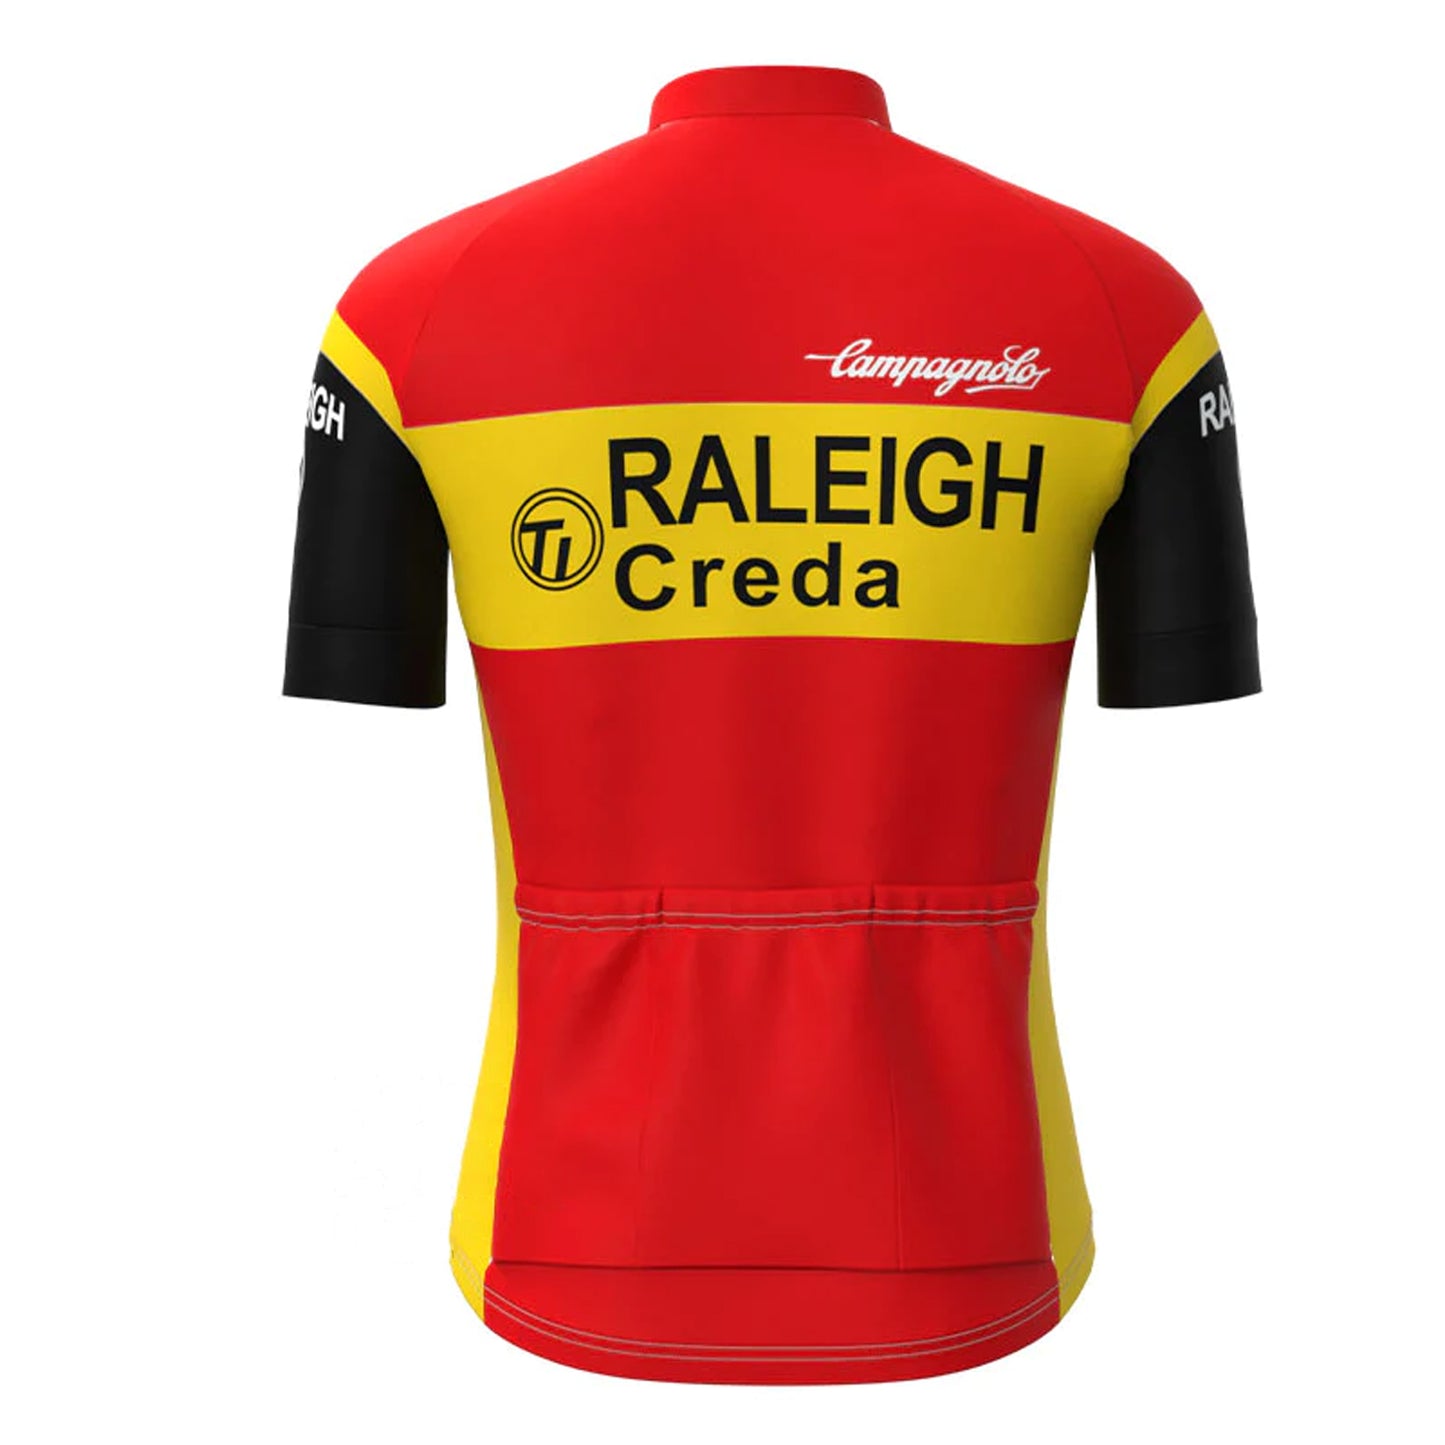 TI-Raleigh Red Vintage Short Sleeve Cycling Jersey Top